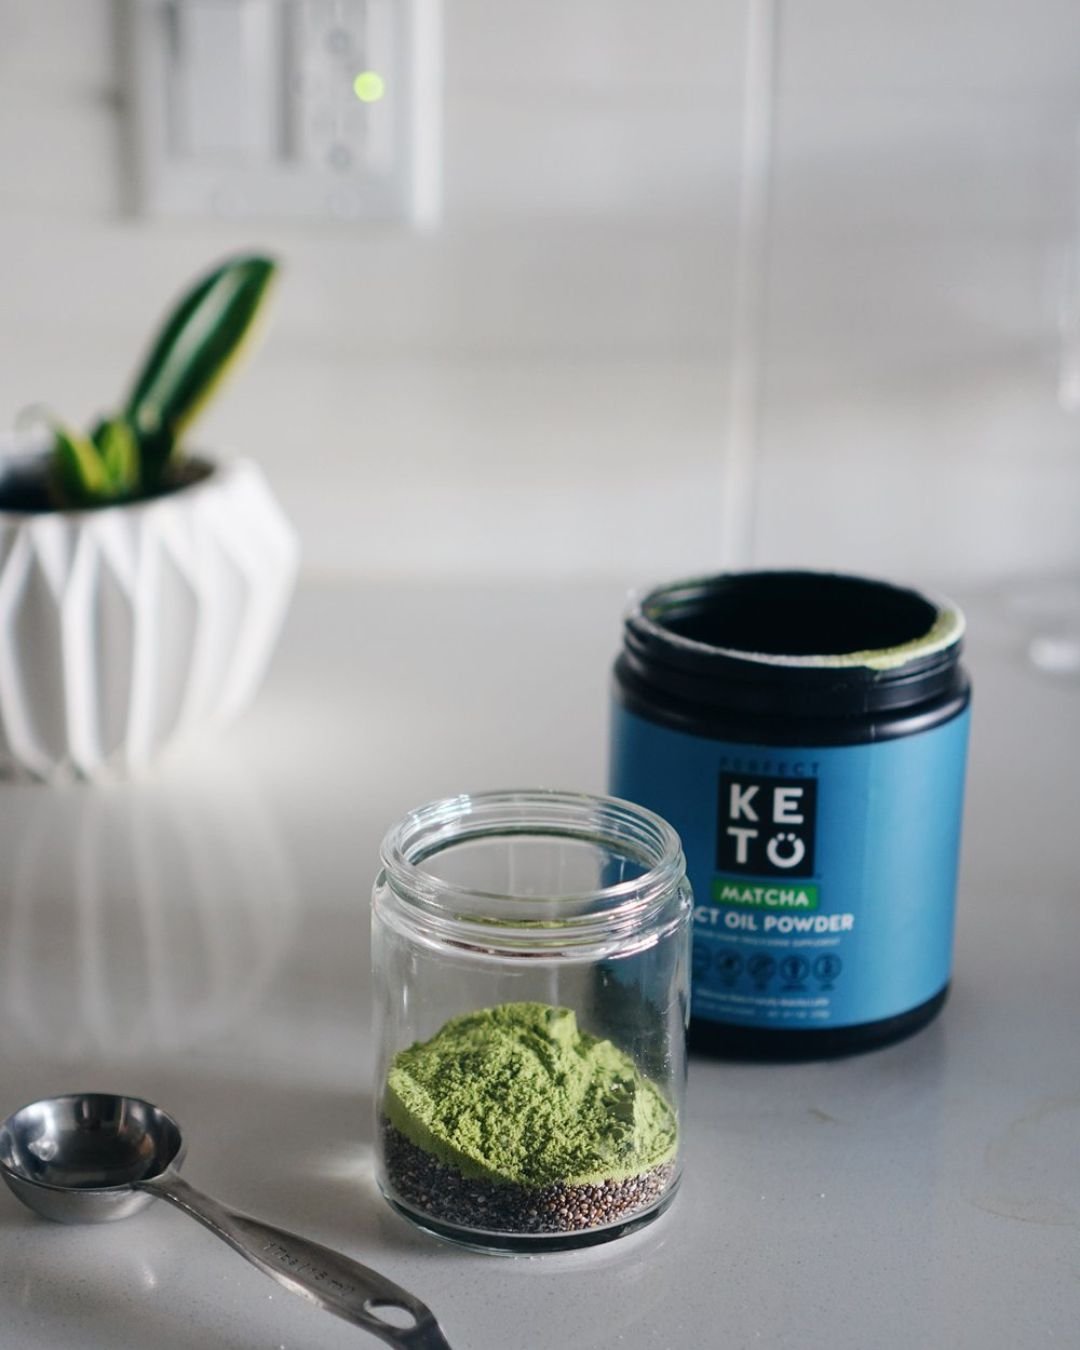 Perfect Keto's MCT Powder is made from 100% pure coconuts and is free of fillers or artificial ingredients. Mix it into your coffee or smoothie for a quick energy boost.